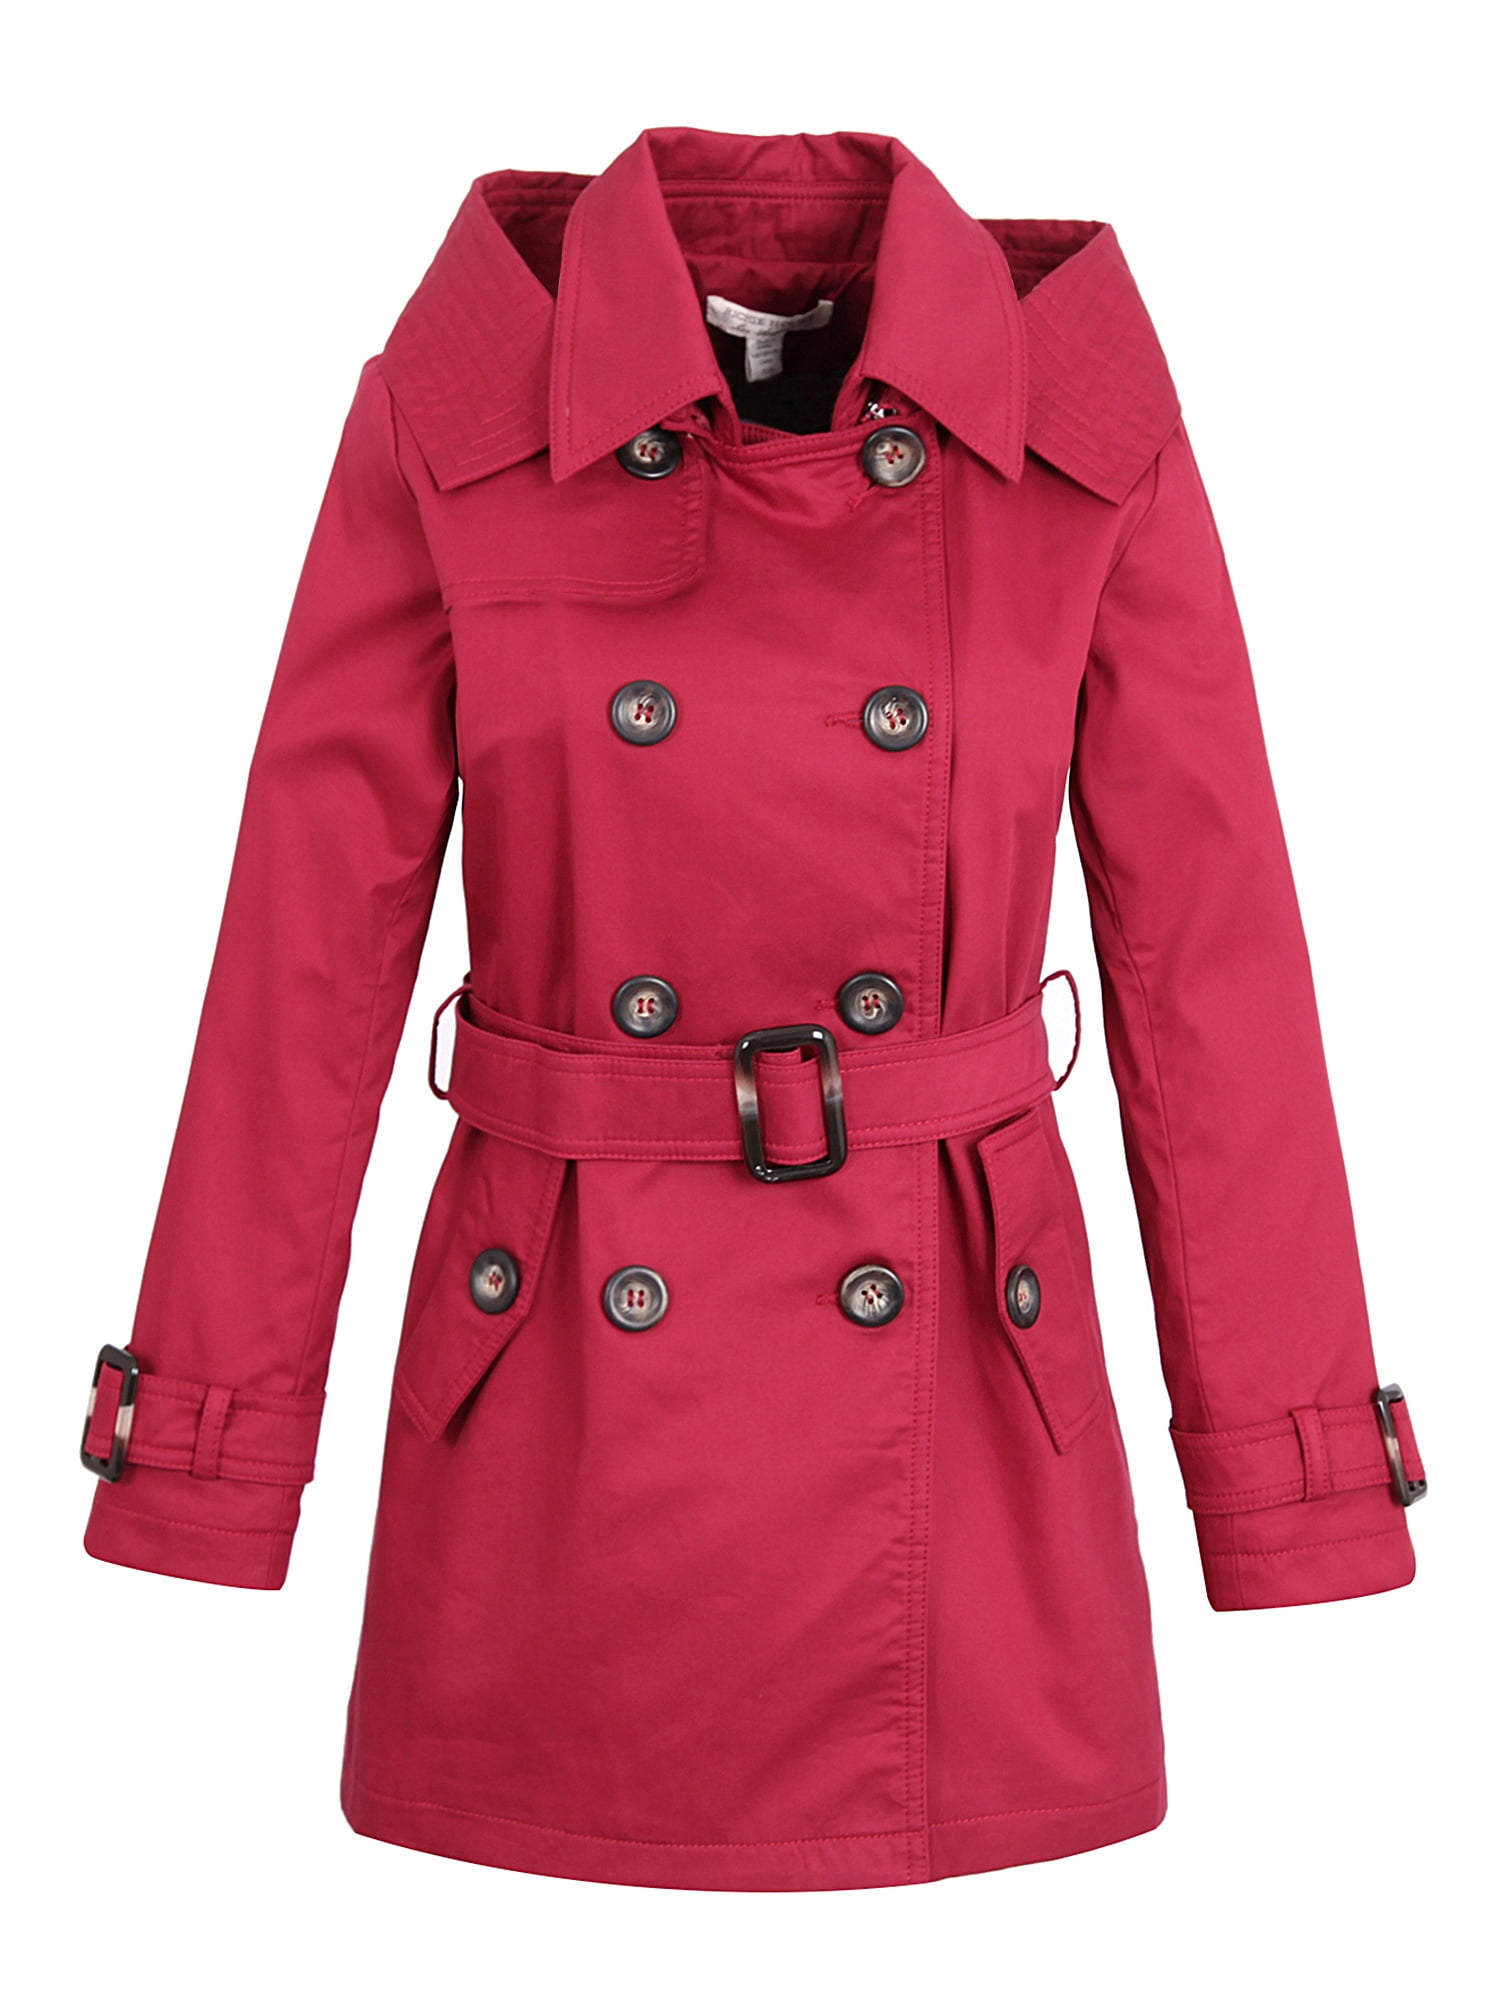 Richie House Little Girls Patterened Trench Coat Rh0741 